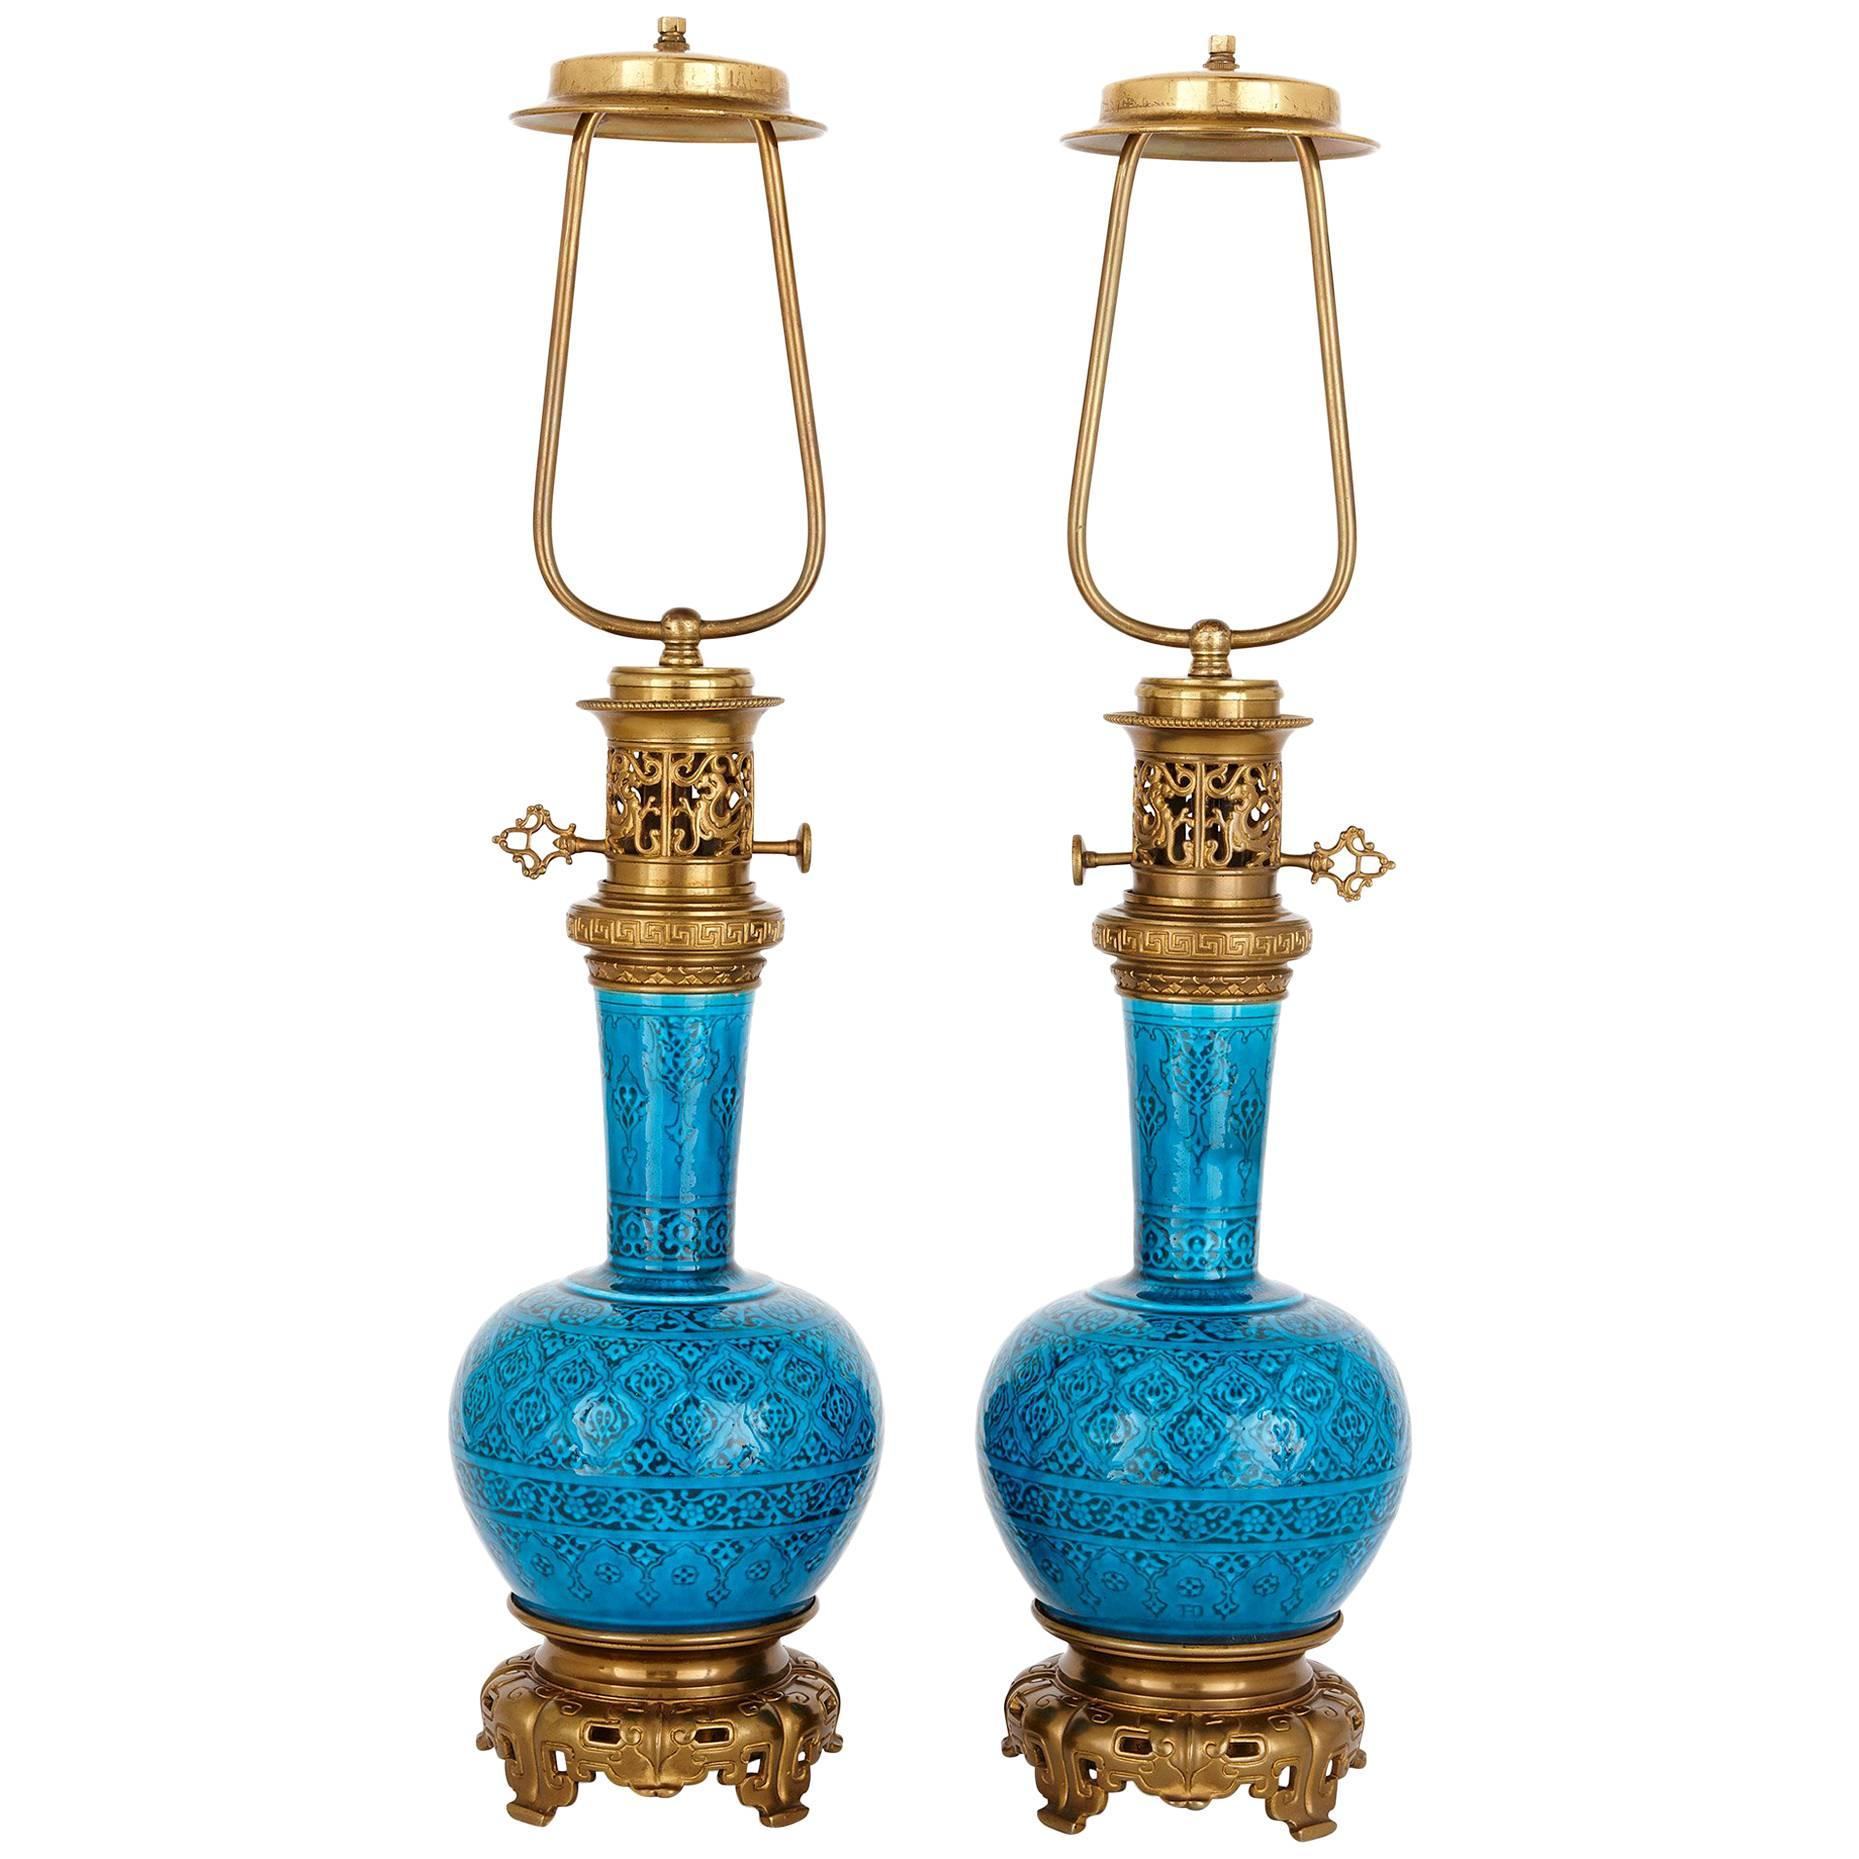 Pair of French Turquoise Faience Lamps by Theodore Deck, in the Persian Style